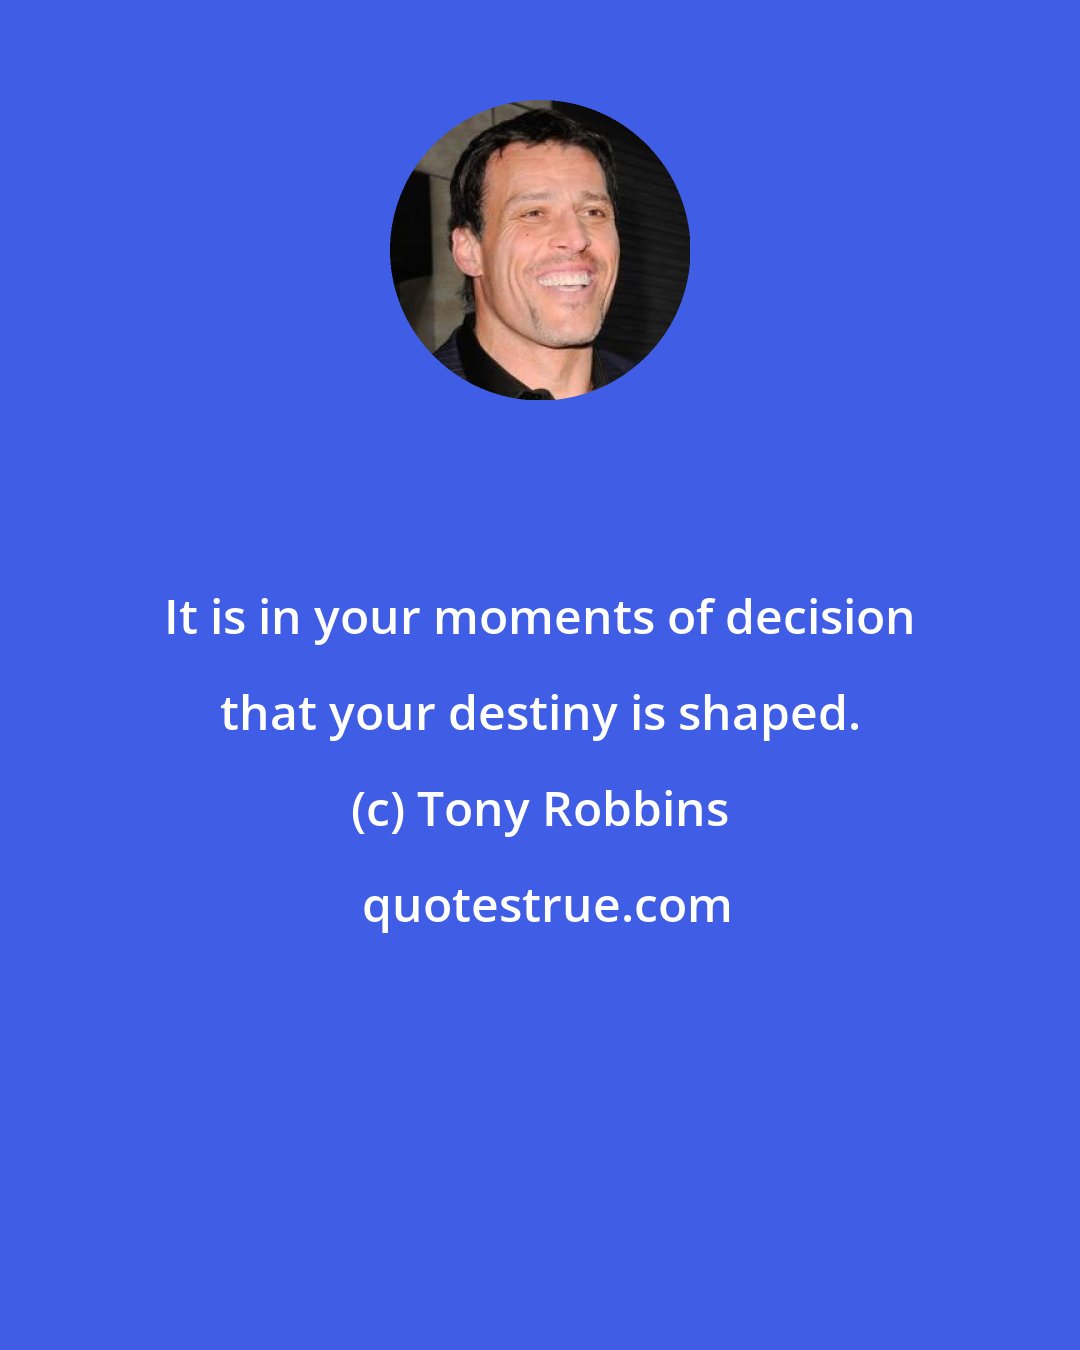 Tony Robbins: It is in your moments of decision that your destiny is shaped.